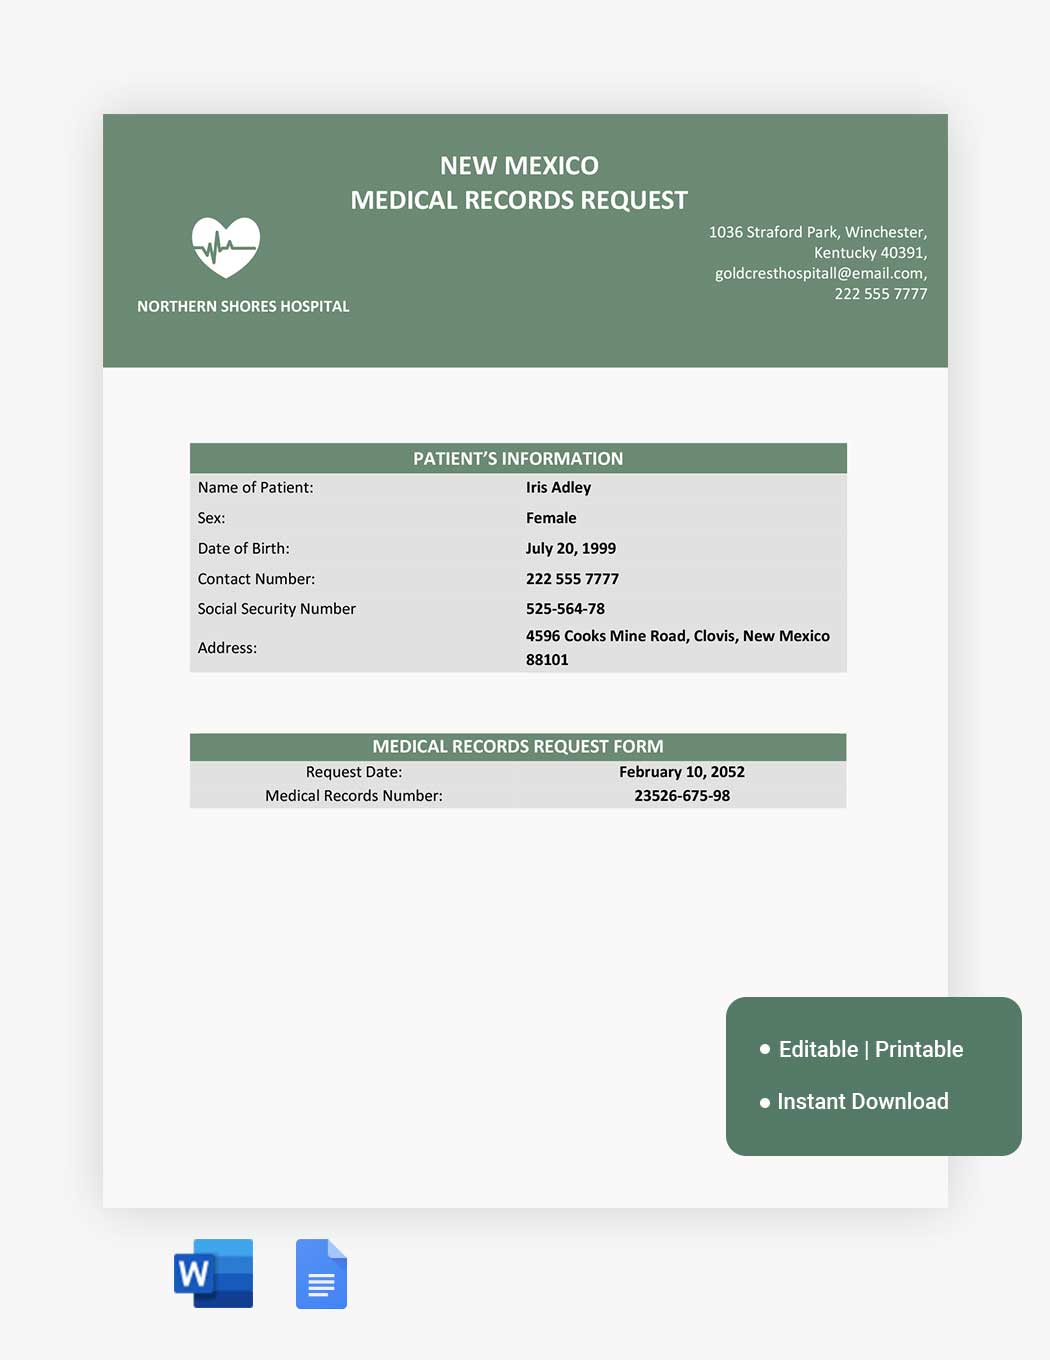 New Mexico Medical Records Request Template in Word, Google Docs